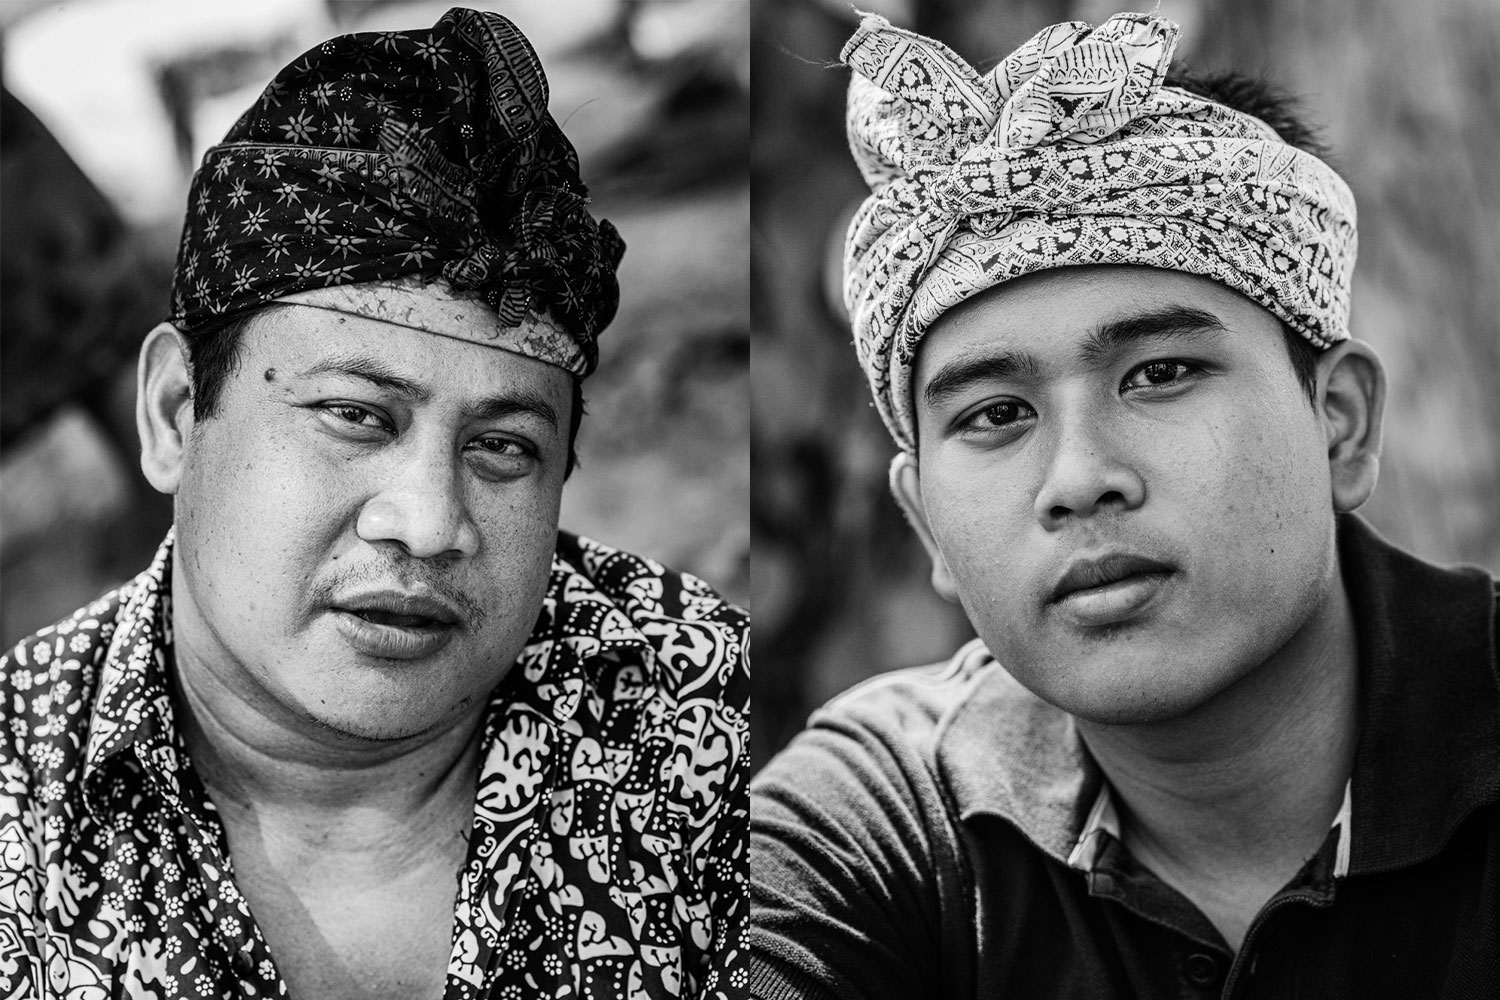 Portrait photo of two young men taken in Bali at a cremation